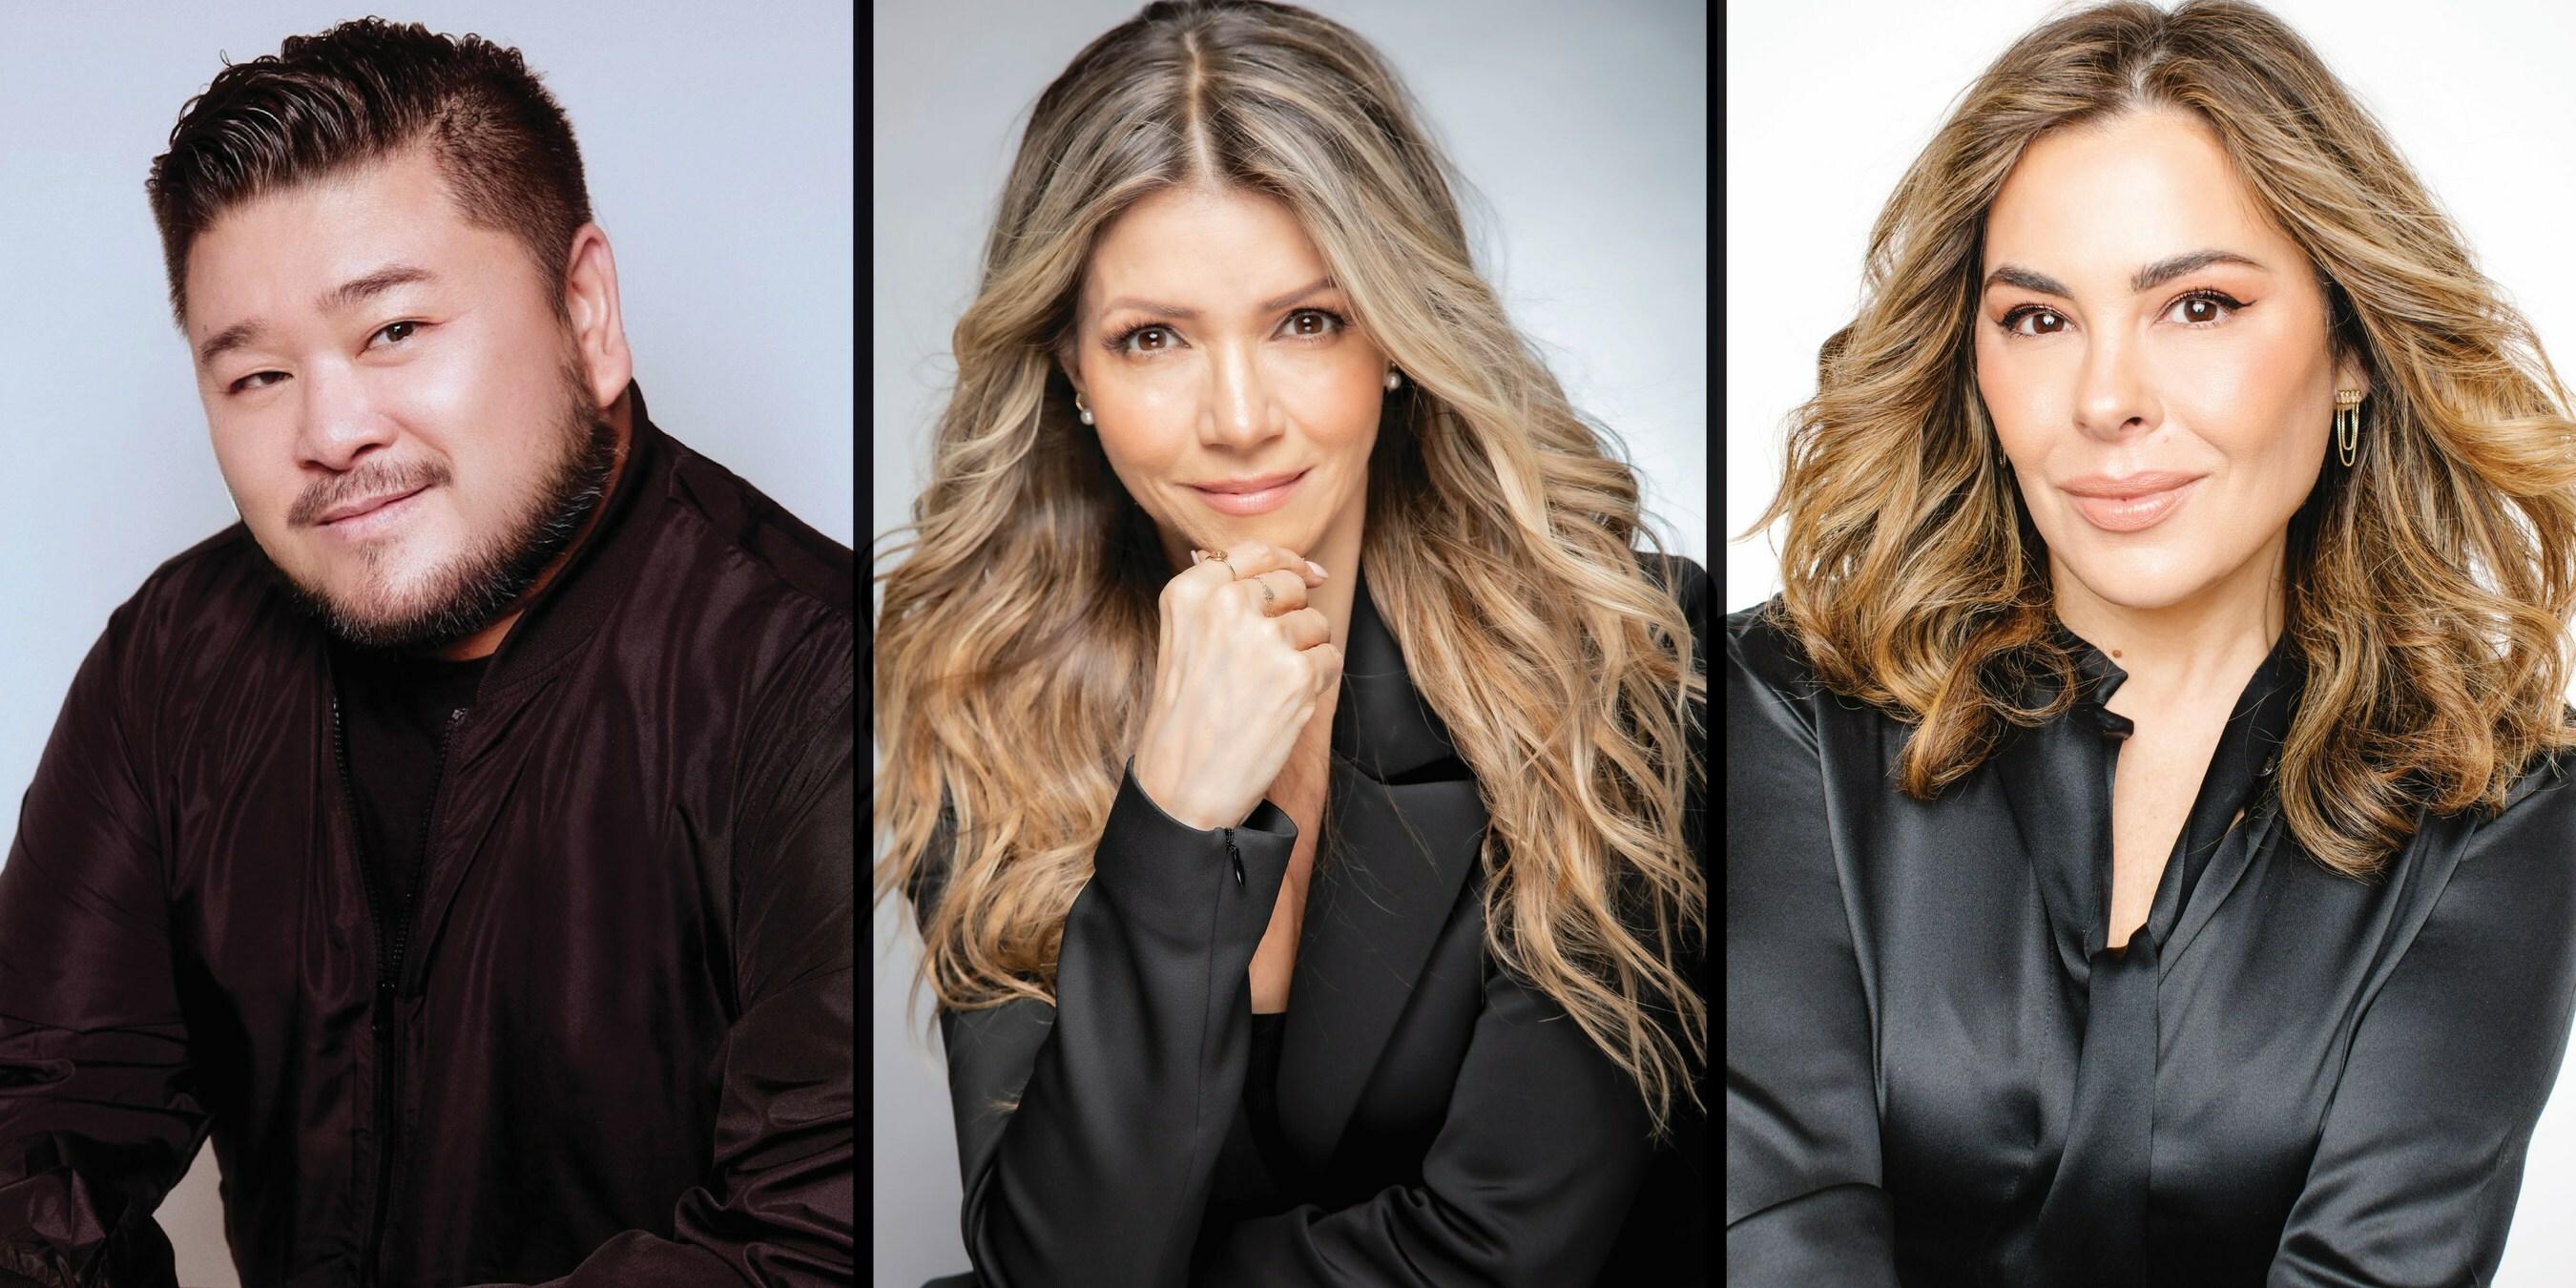 Allan Avendaño, Claudia Betancur and Erica Taylor will be part of future L'Oreal brand launches